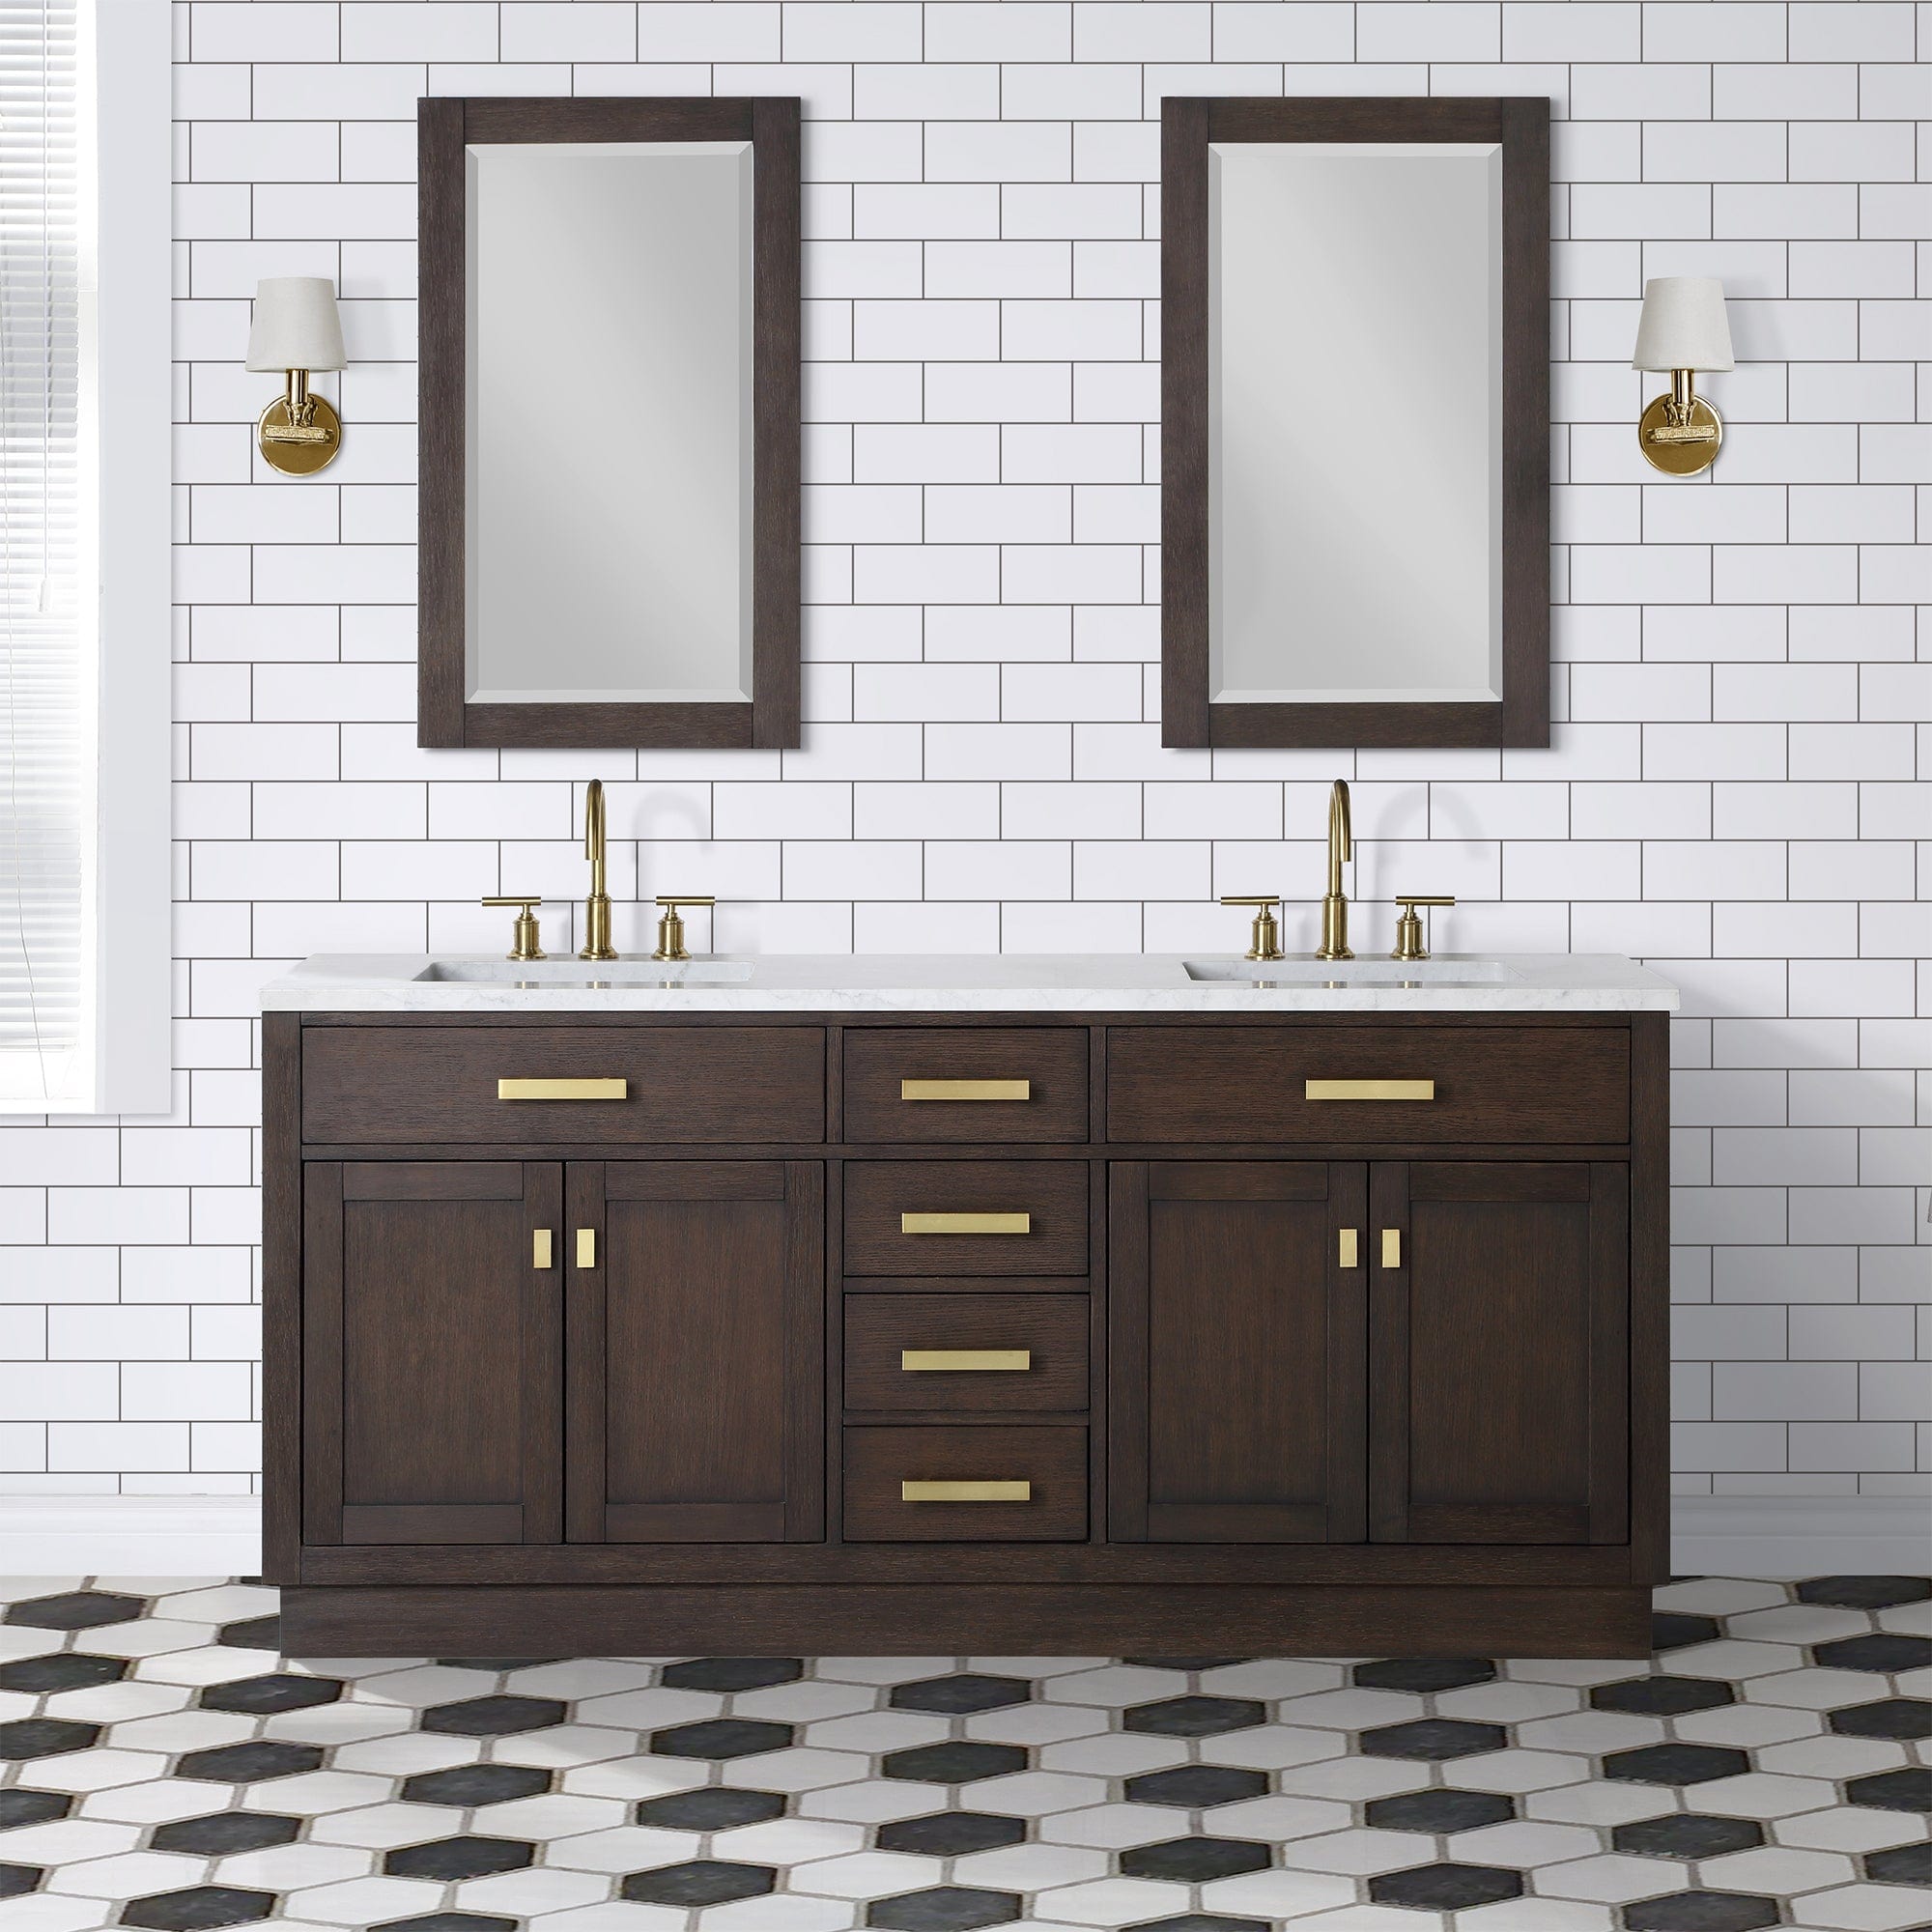 Chestnut 72 In. Double Sink Carrara White Marble Countertop Vanity In Brown Oak with Mirrors - Molaix732030764880CH72CW06BK-R21000000